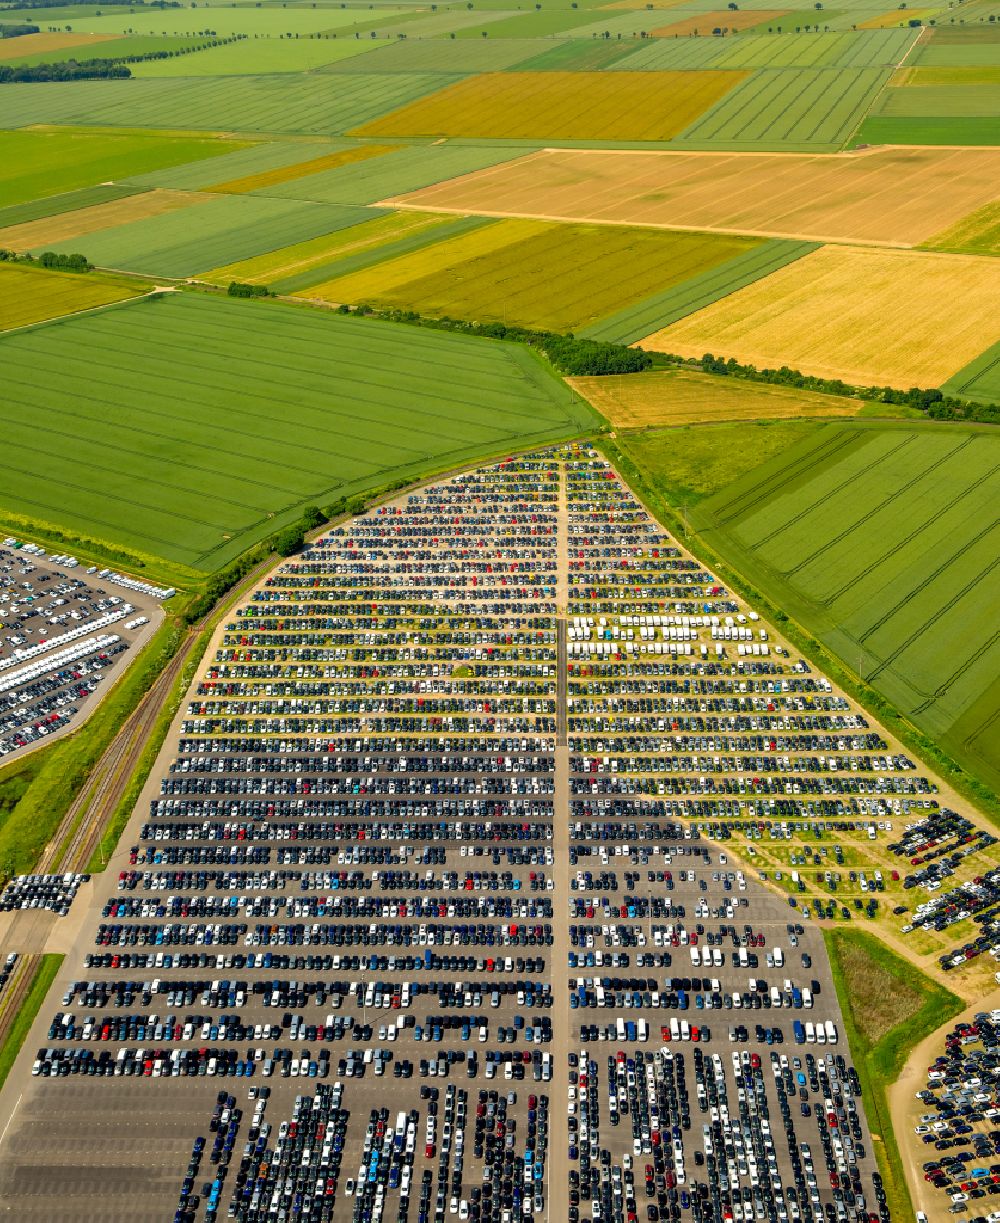 Zülpich from the bird's eye view: Parking and storage space for new cars Automobile in Zuelpich in North Rhine-Westphalia. Operator of the site is the Norwegian - Swedish shipping company Wallenius Wilhelmsen Logistics, which deals mainly with the global transport of cars, trucks and other rolling cargoes